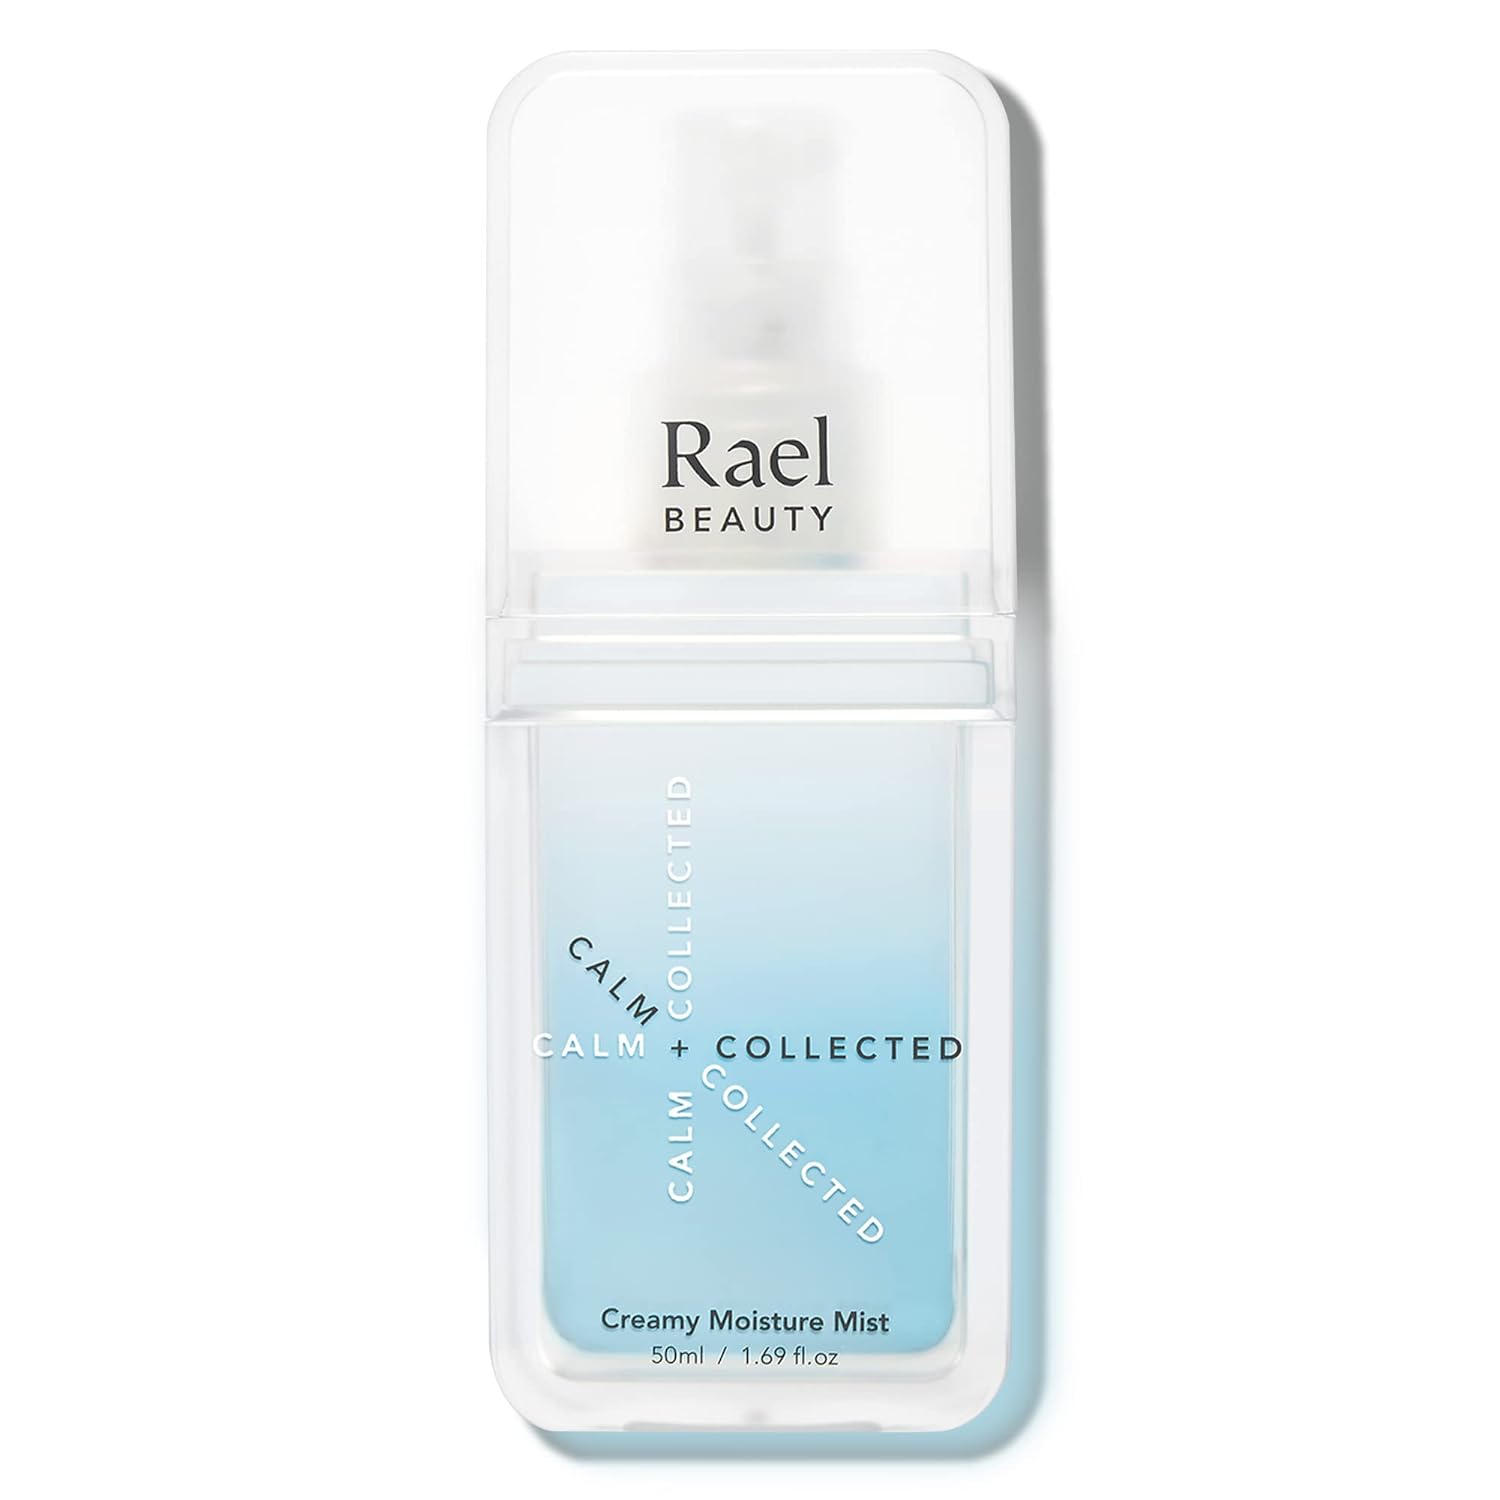 Rael Skin Care, Creamy Moisture Facial Mist Spray - Hydrating Facial Spray, Korean Skincare, All Skin Types, with Hyaluronic Acid and Purifying Bamboo Extract, For On-The-Go, Cruelty Free (1.69oz)